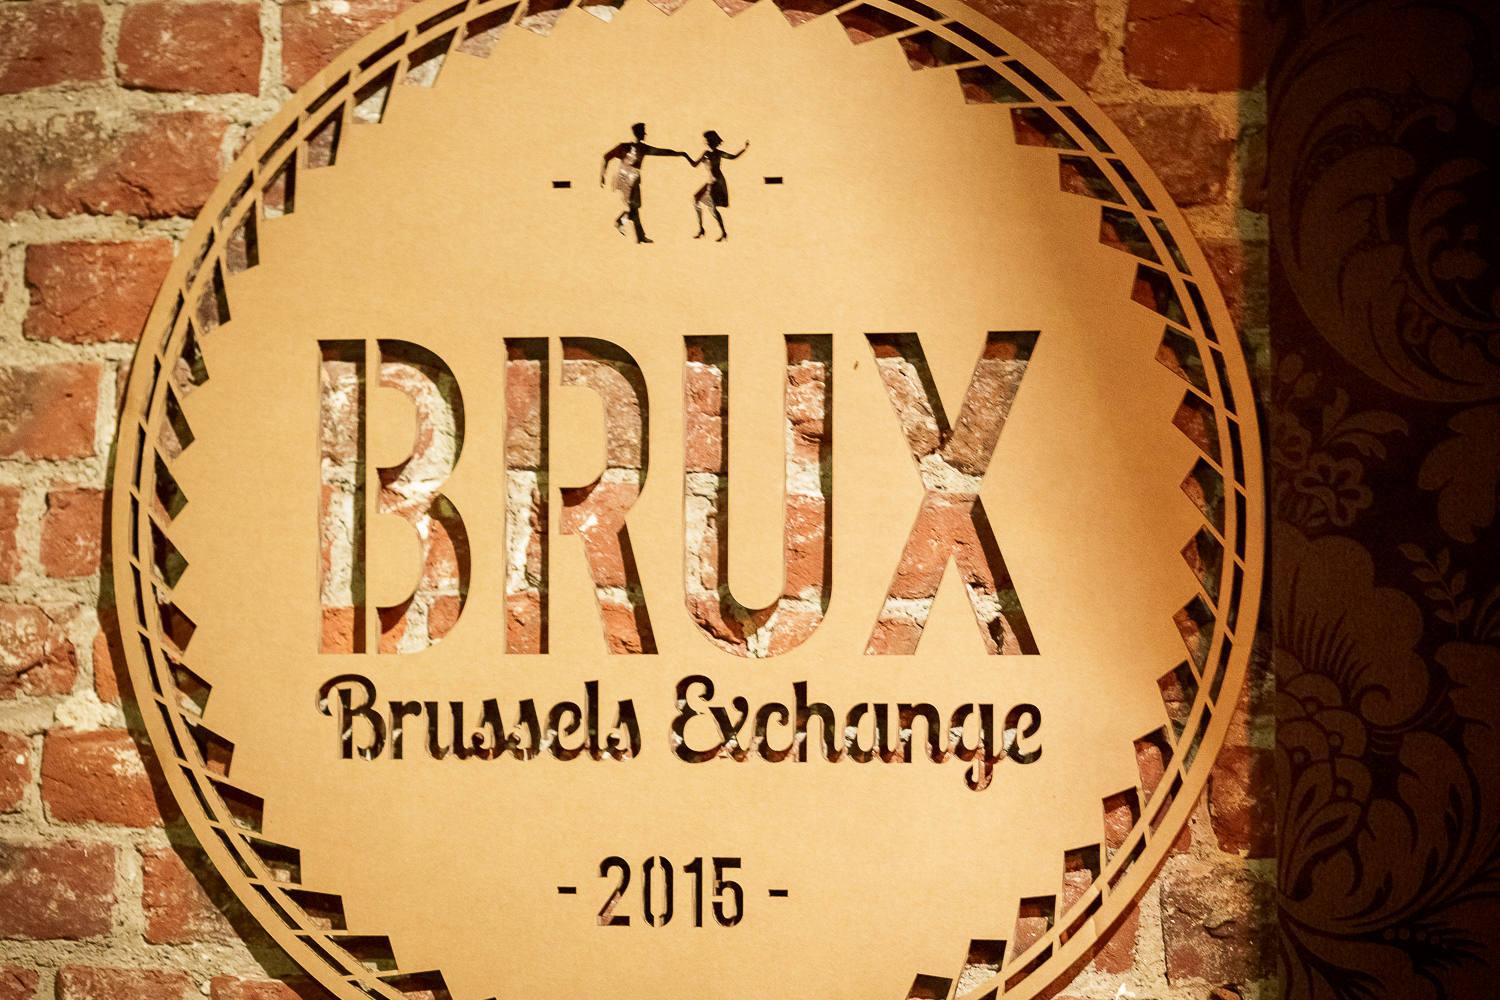  BRUX 2015 - For Dancers Only (http://d.pr/1fEEY) - http://www.ebobrie.com/brux-2015 